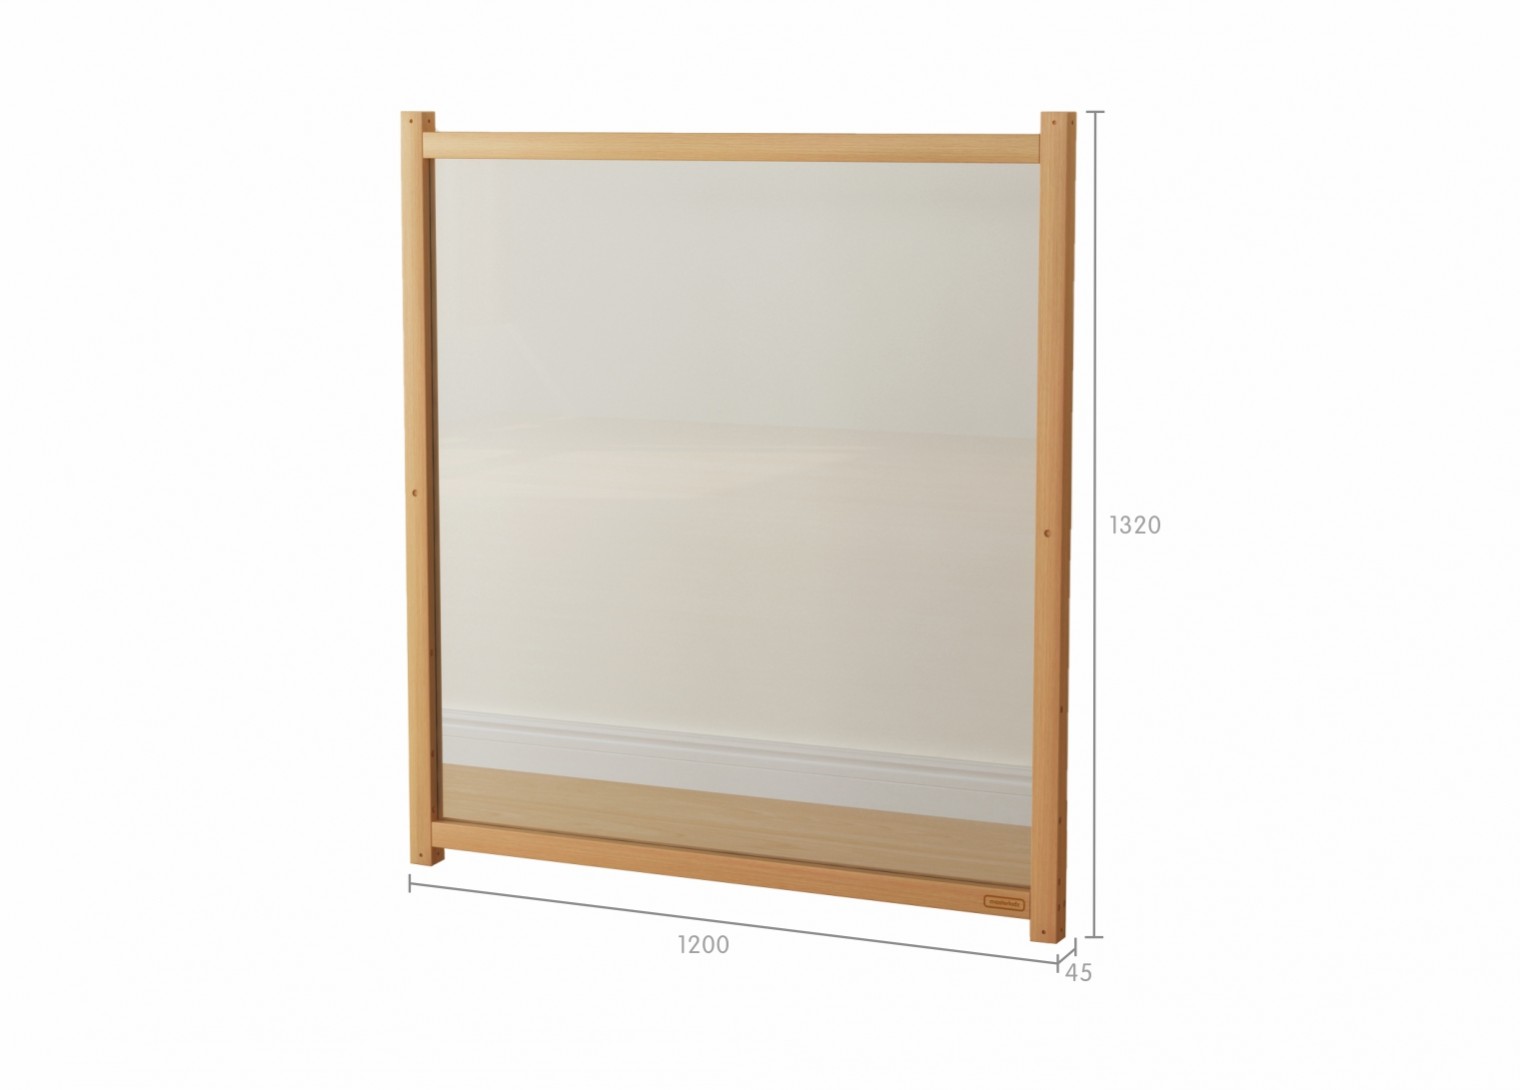 1320H x 1200L Divider - Acrylic Painting Wall